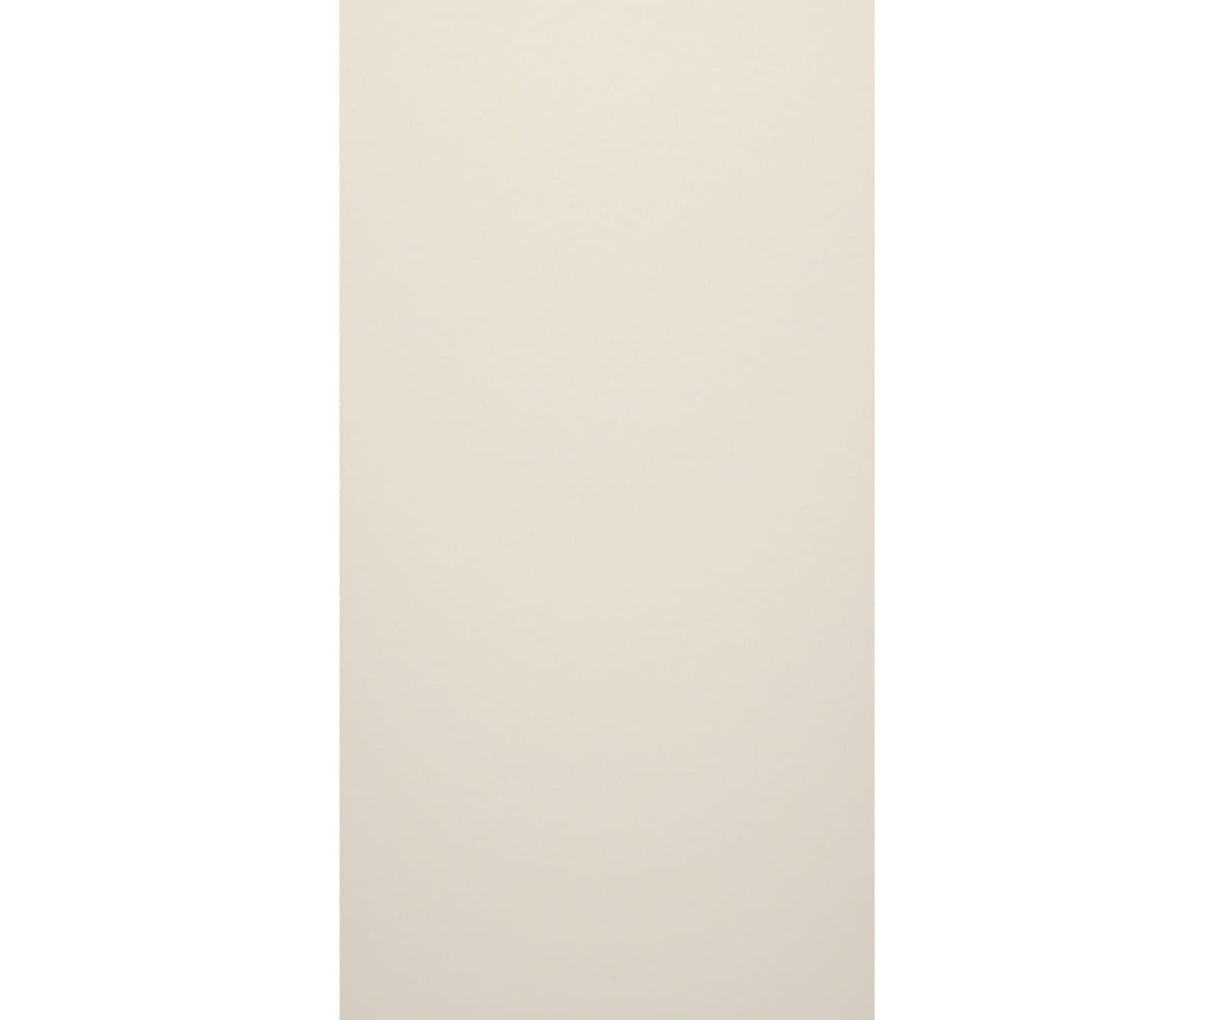 Swanstone SMMK-8450-1 50 x 84 Swanstone Smooth Tile Glue up Bathtub and Shower Single Wall Panel in Bisque SMMK8450.018